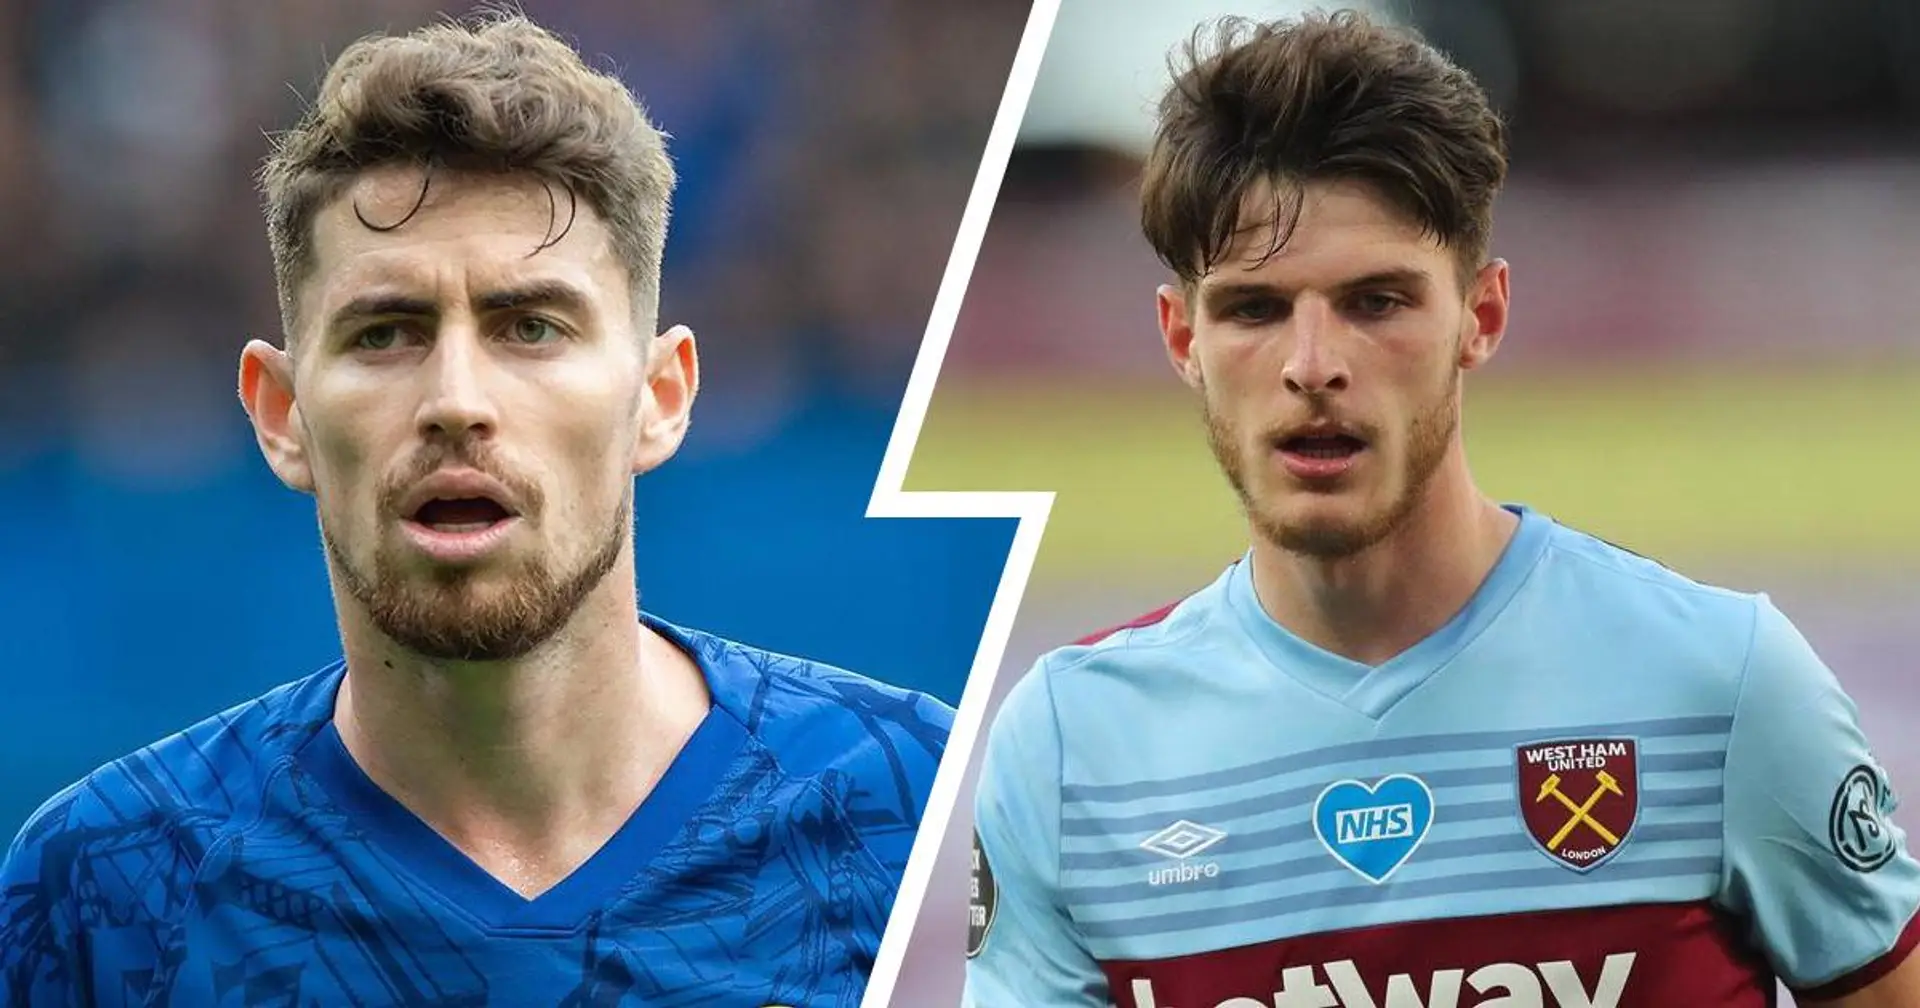 Lampard 'willing' to sell Jorginho to fund Declan Rice transfer